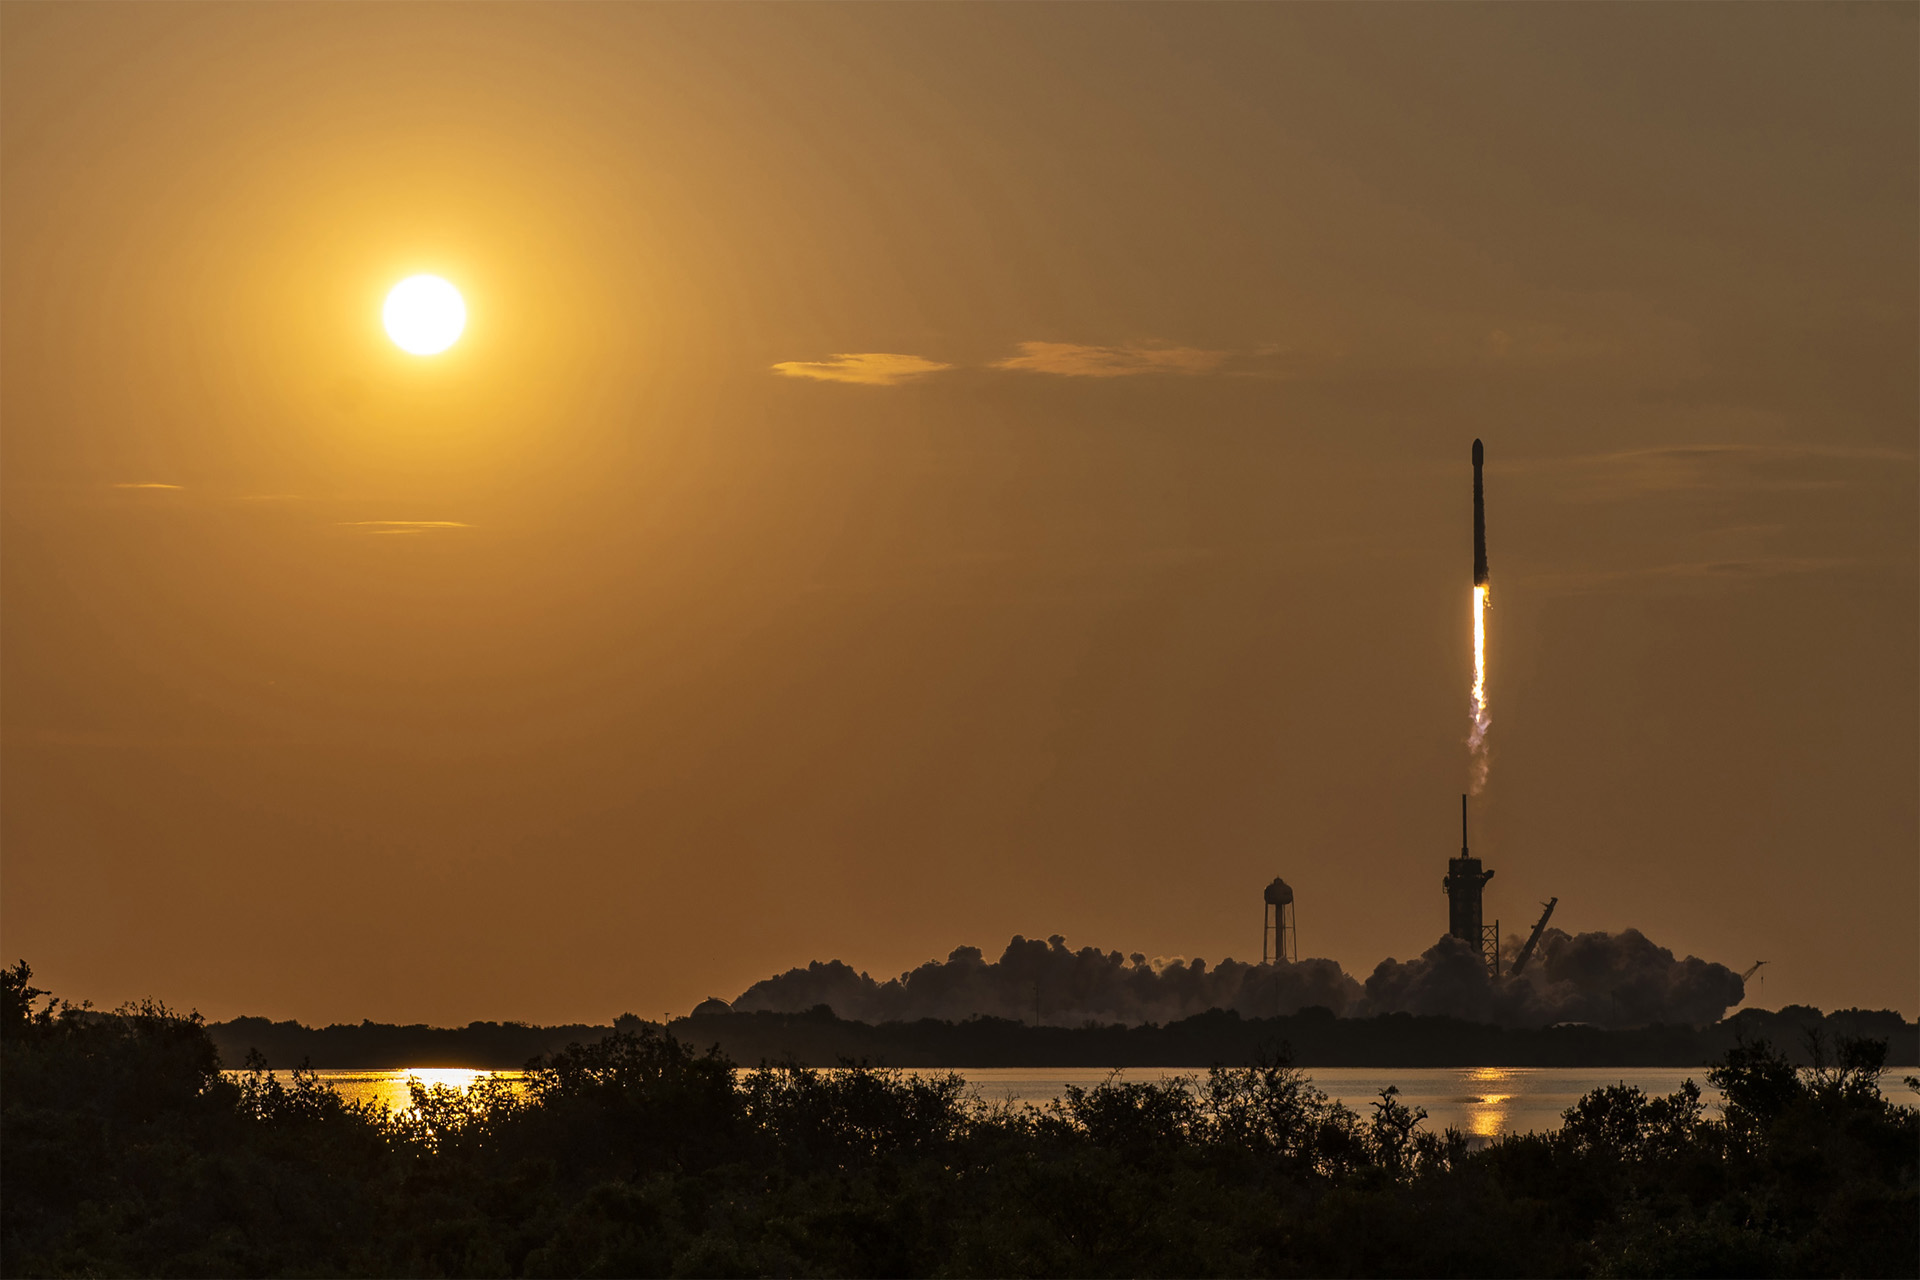 A photo of SpaceX's Falcon 9 rocket launches with the rising sun.